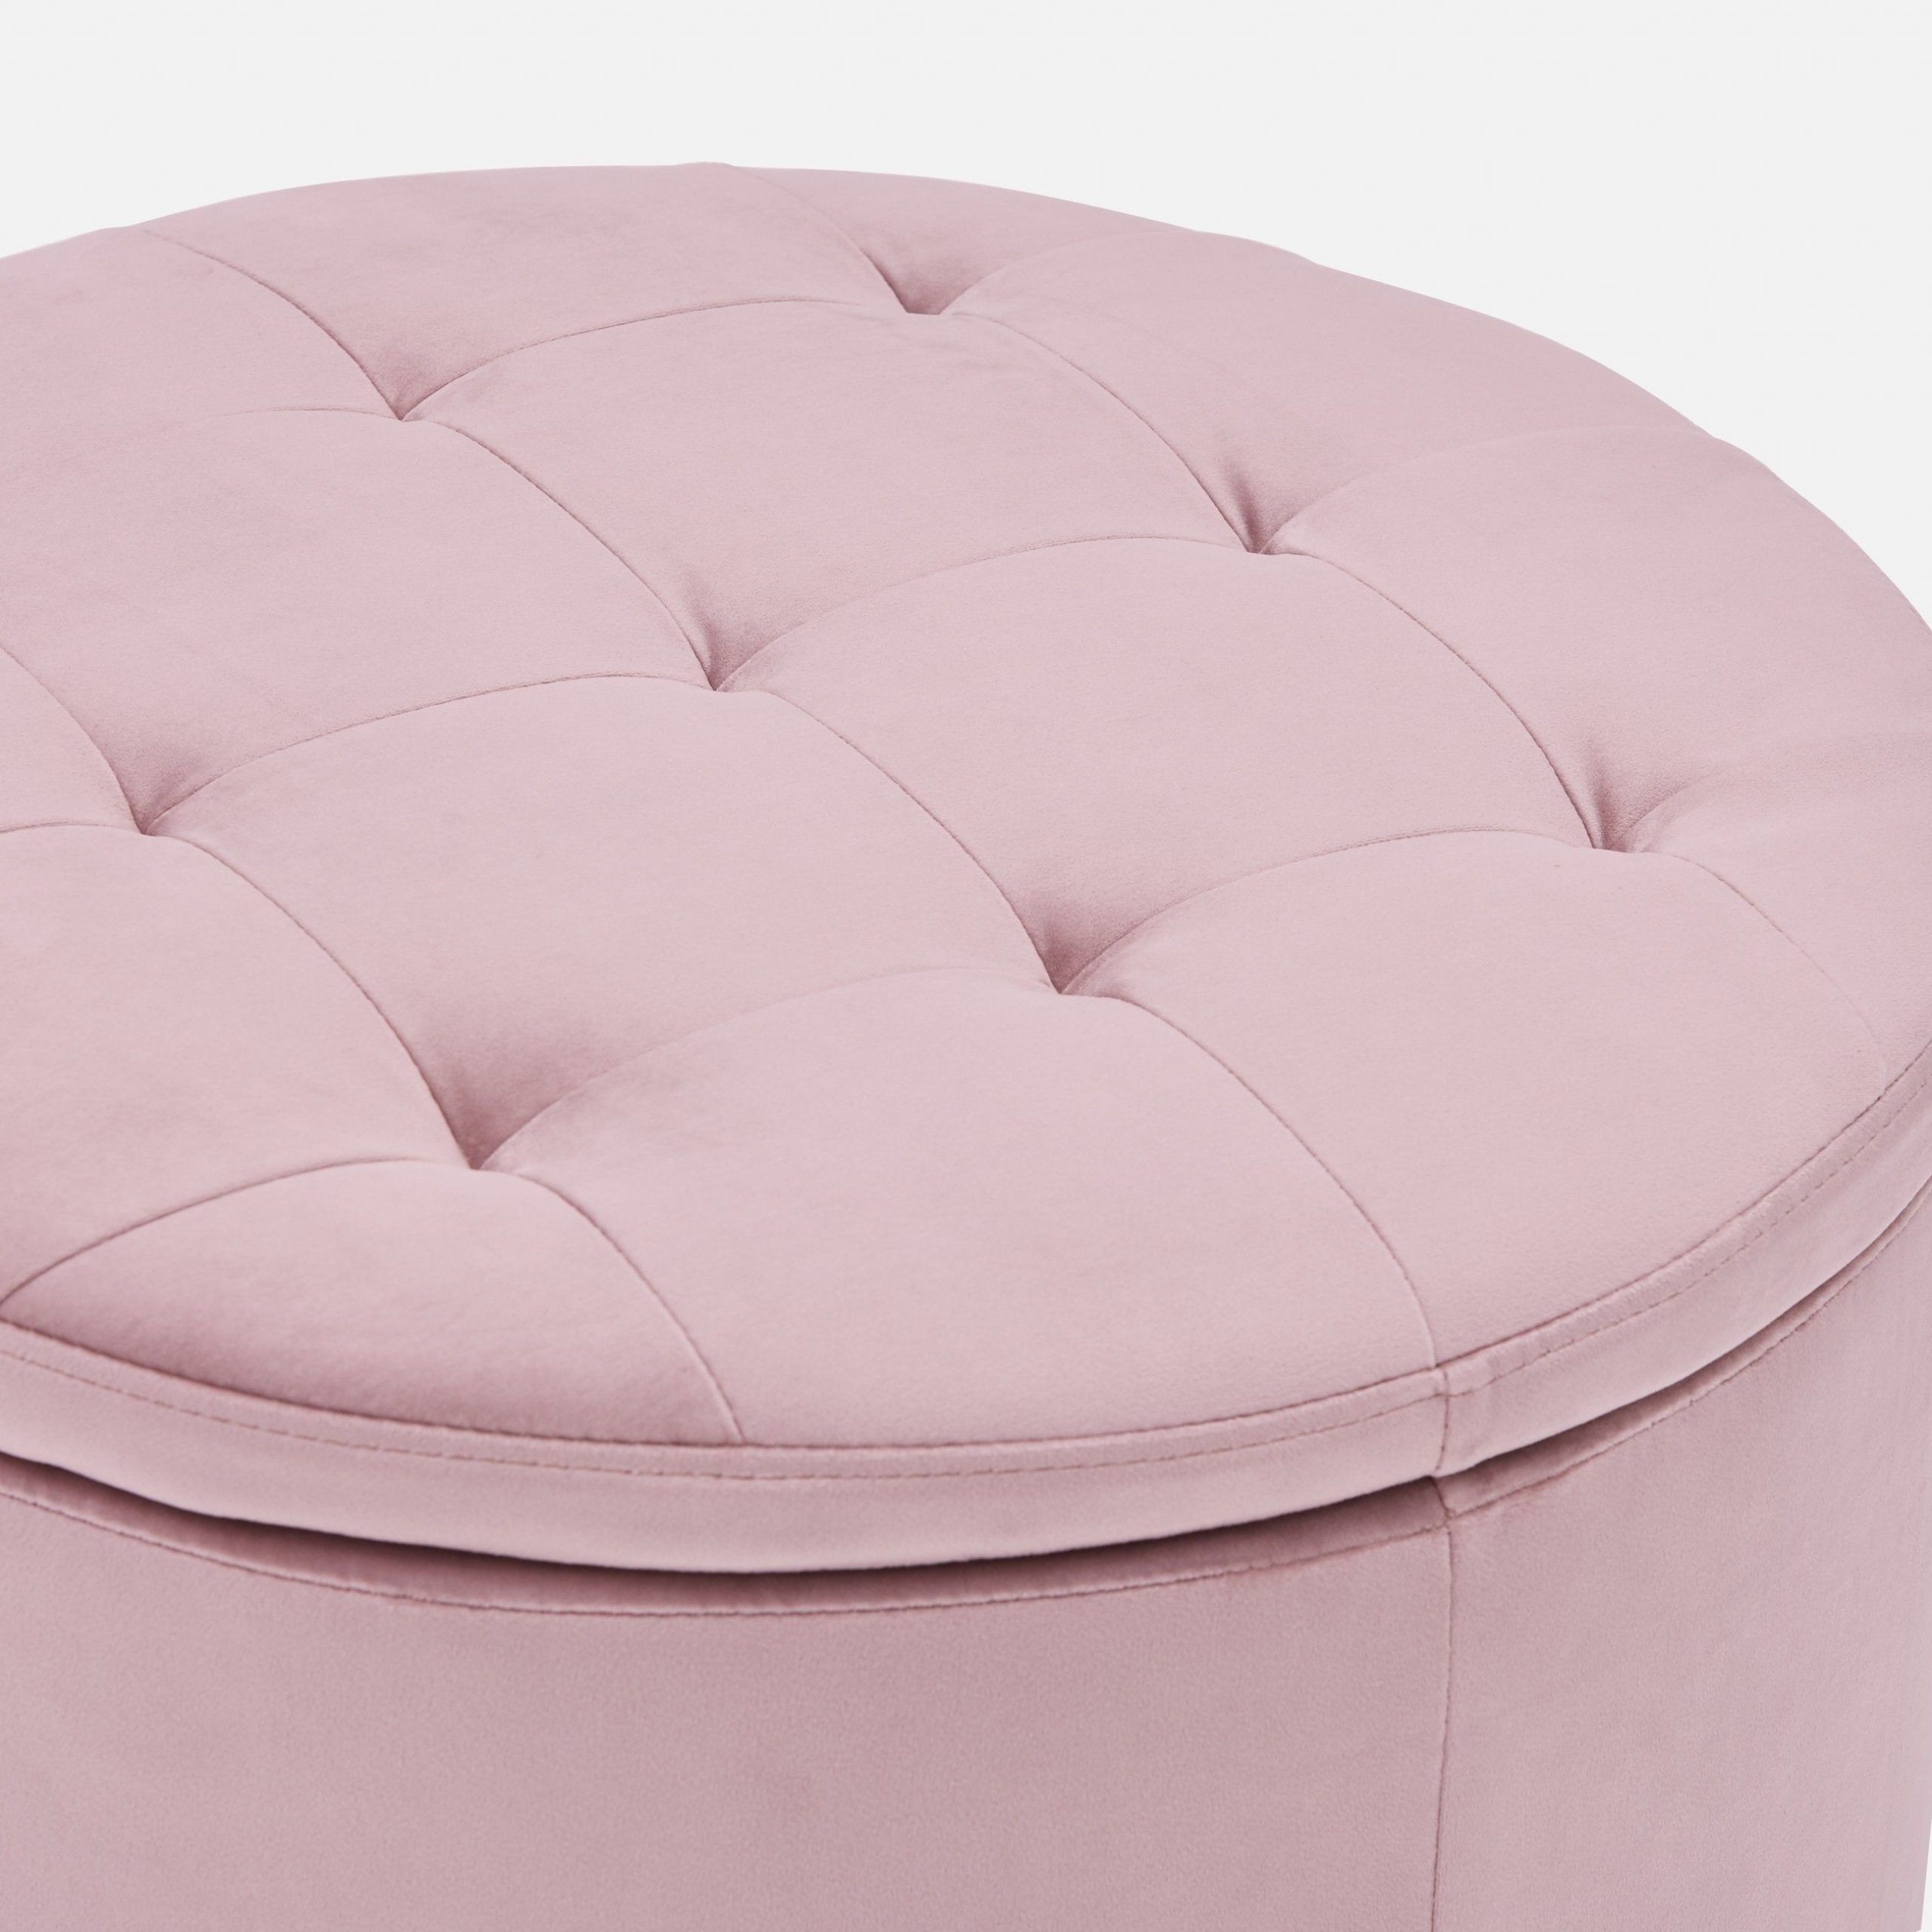 Velvet Ottoman Intended For Pink Champagne Tufted Fabric Ottomans (View 1 of 10)